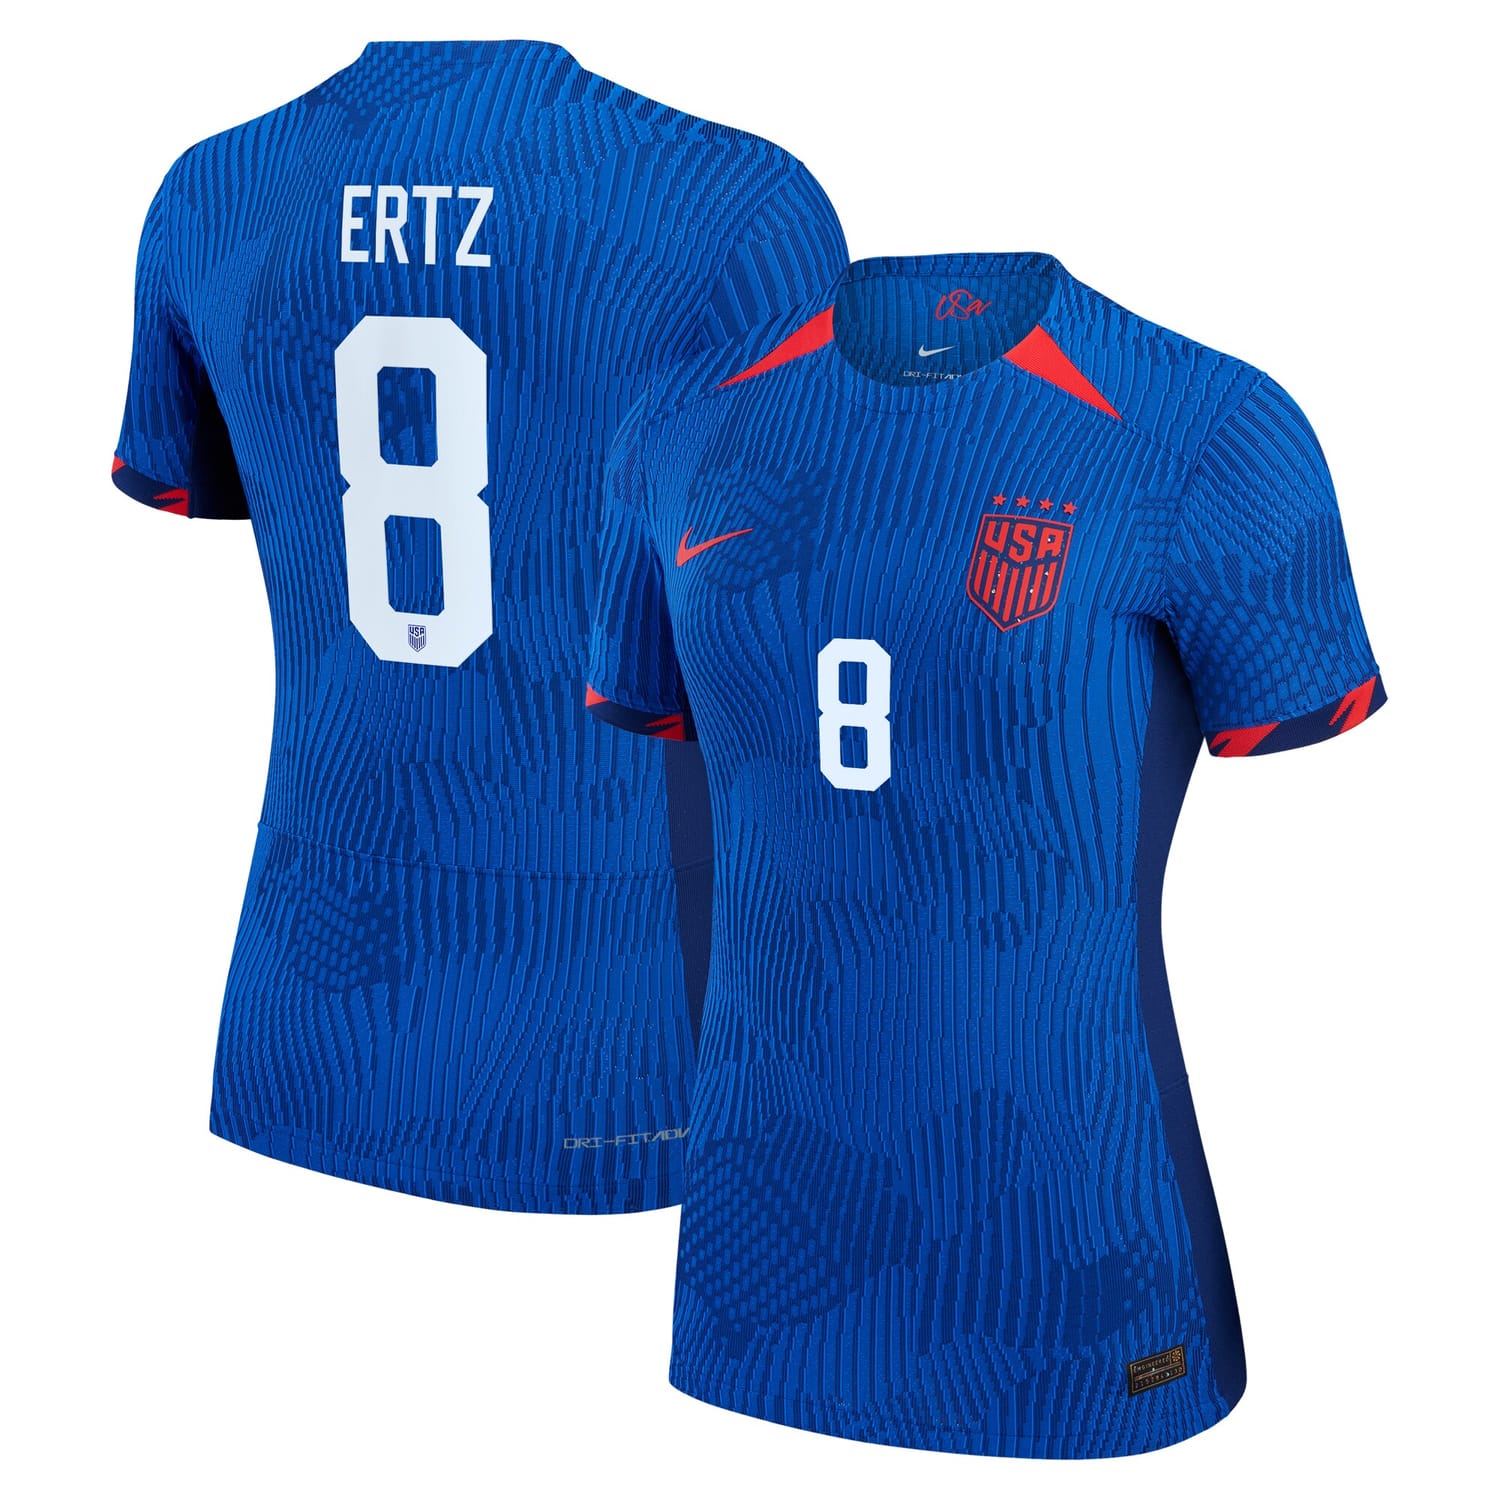 USWNT Away Authentic Jersey Shirt Royal 2023 player Julie Ertz printing for Women